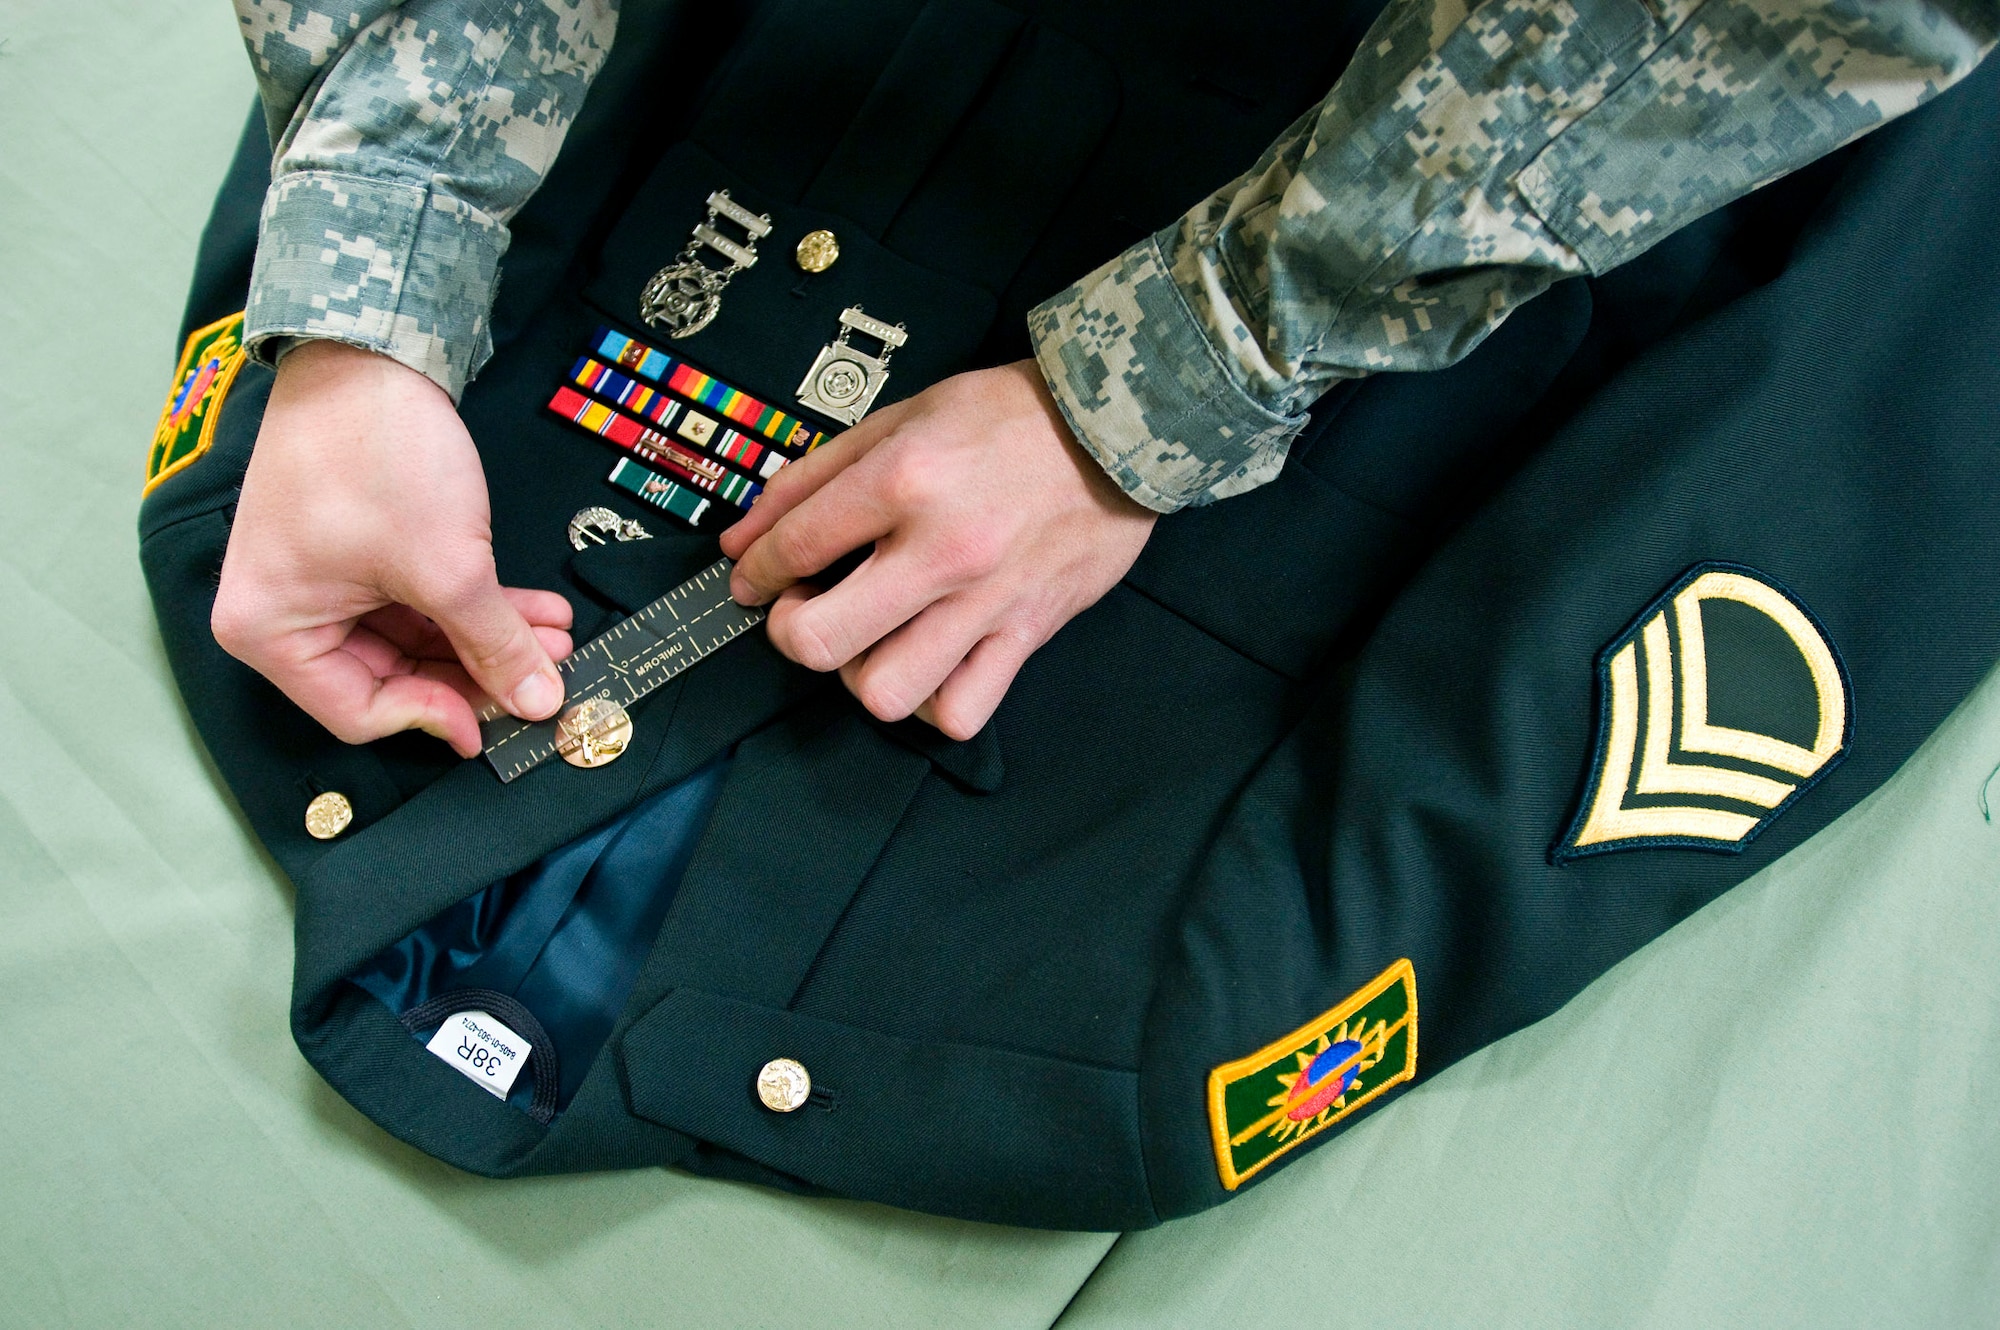 Specialist Noel Rivera, a mortuary affairs specialist, prepares a U.S. Army service dress uniform for a fallen solider. Servicemembers in the uniform section of the Air Force Mortuary Affairs Operations Center at Dover Air Force Base, Del., prepare uniforms for the fallen heroes and work with military escorts for the dignified-transfer-of-remains process.  Specialist Rivera is deployed from the Army Reserve, 311th Quartermaster Company in Puerto Rico. (U.S. Air Force photo/Staff Sgt. Bennie J. Davis III)